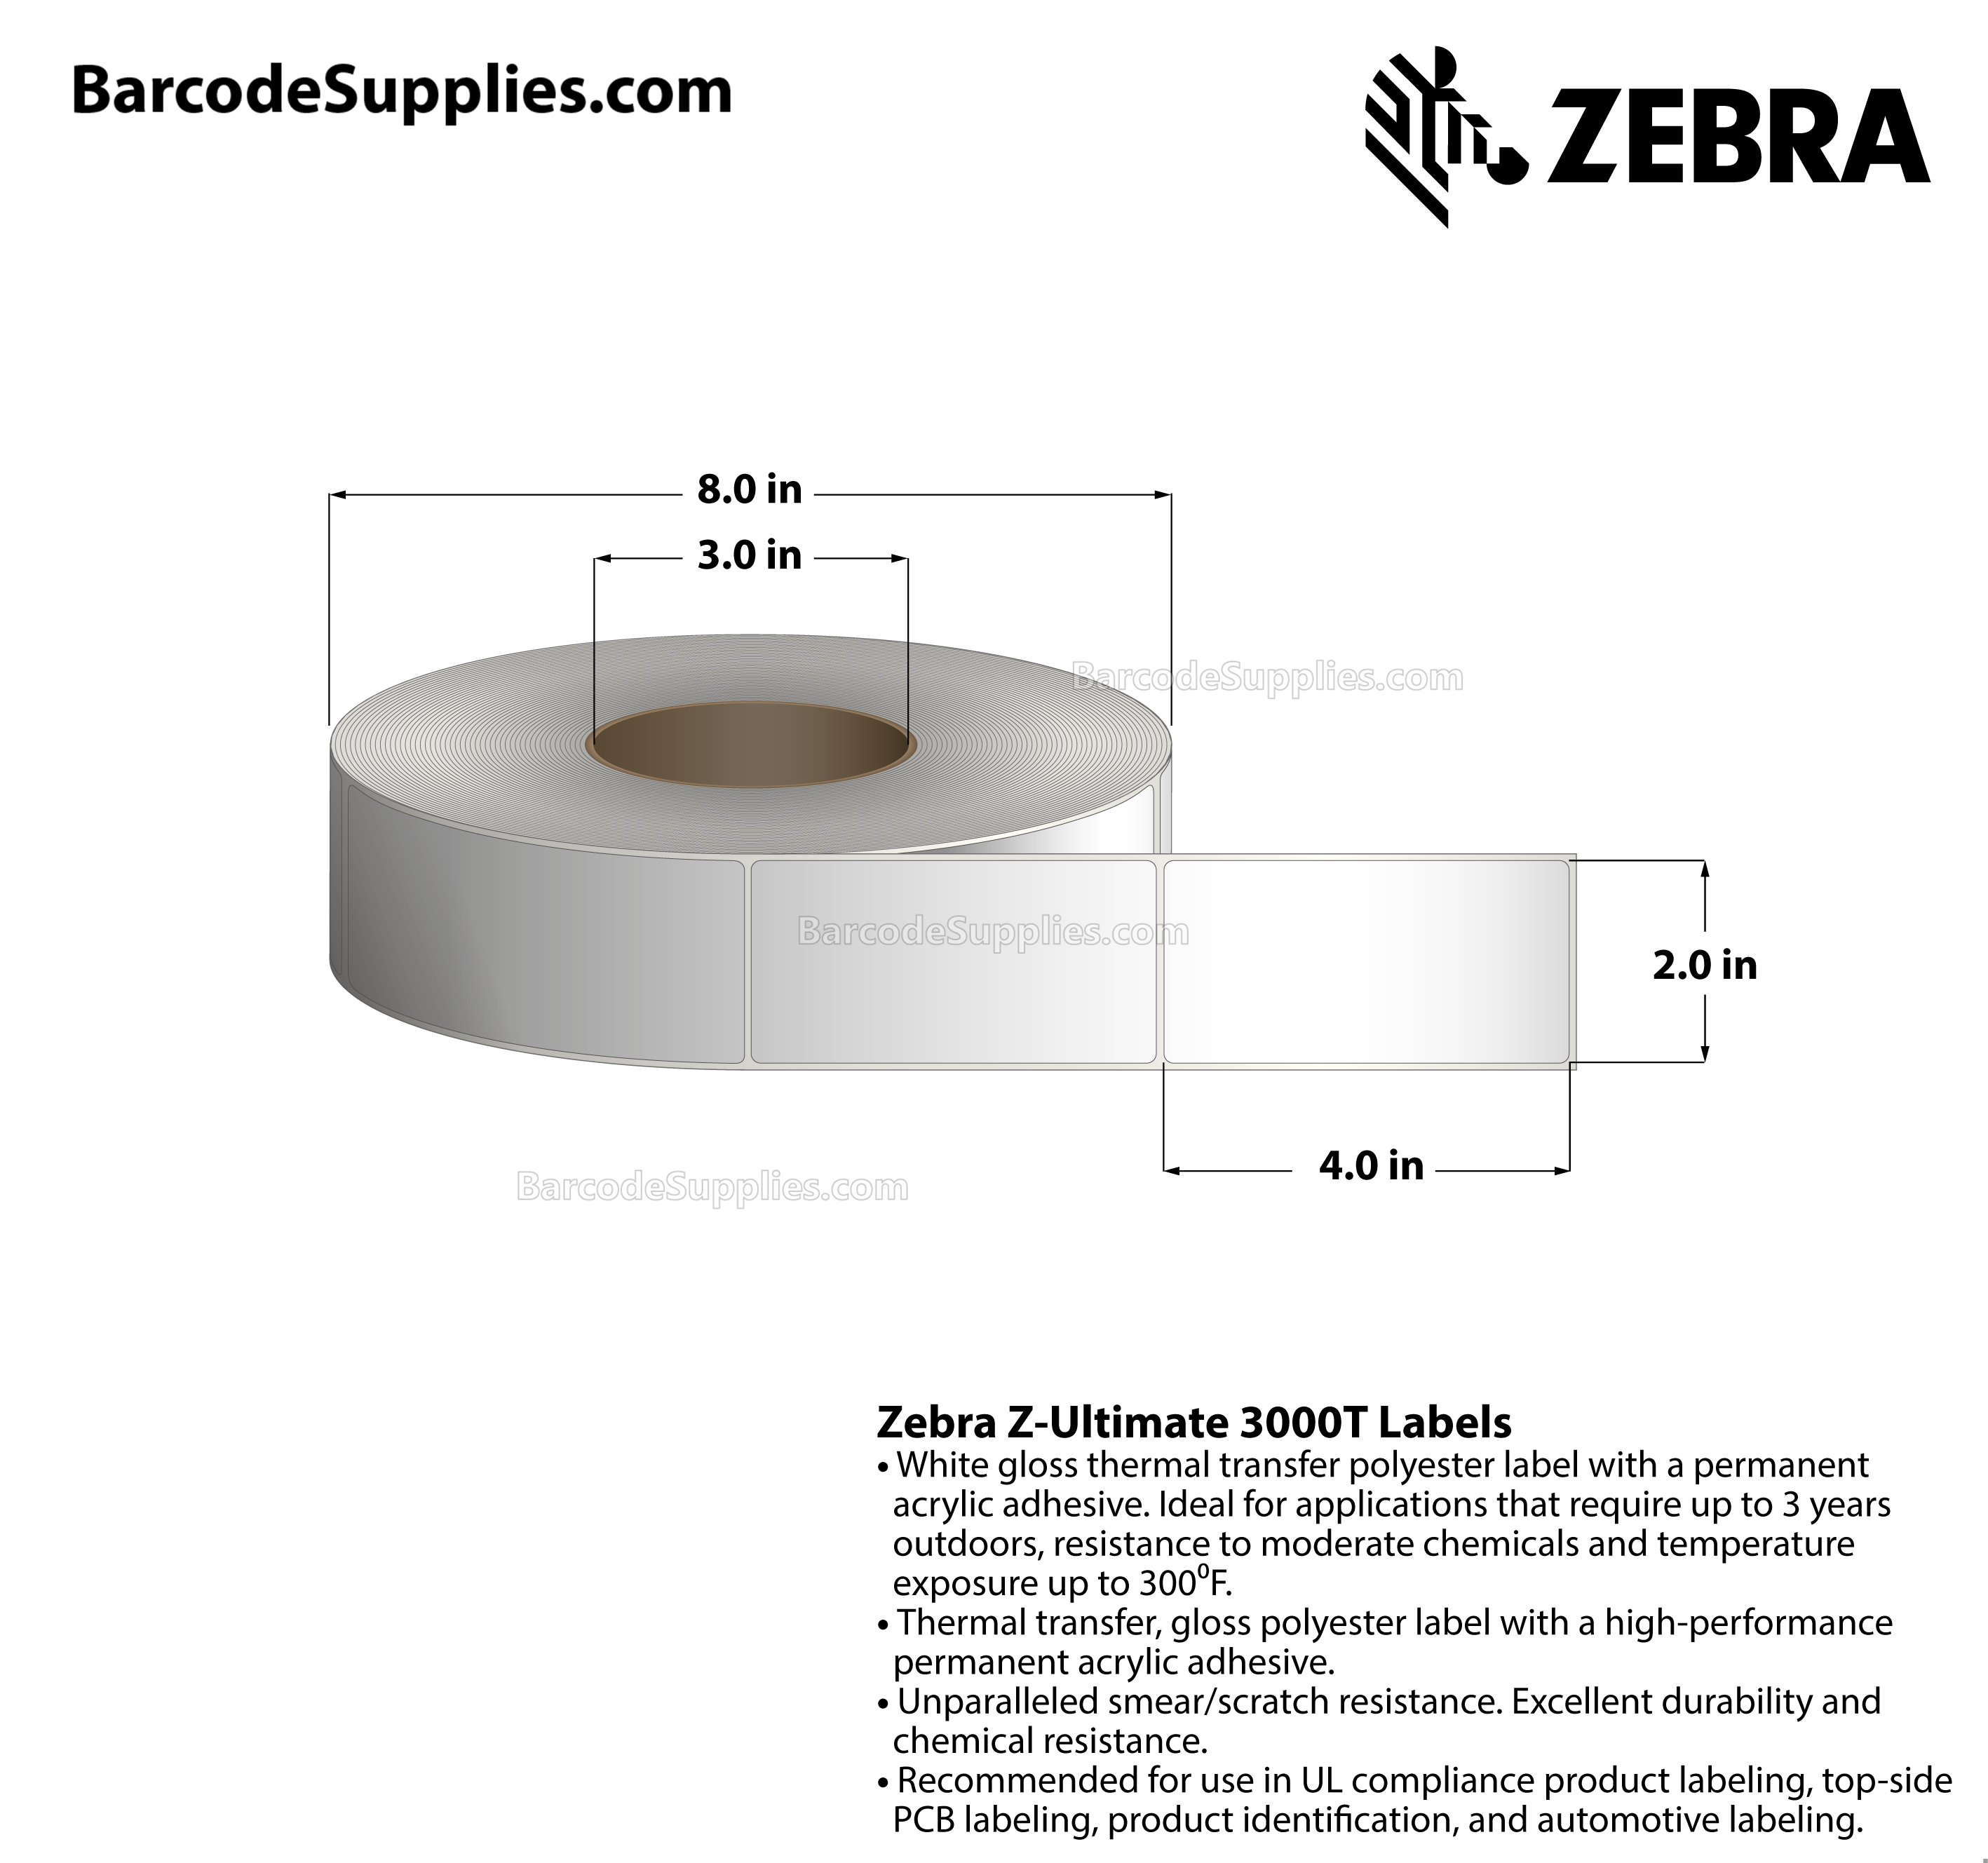 2 x 4 Thermal Transfer White Z-Ultimate 3000T Labels With Permanent Adhesive - Not Perforated - 1570 Labels Per Roll - Carton Of 4 Rolls - 6280 Labels Total - MPN: 10011699